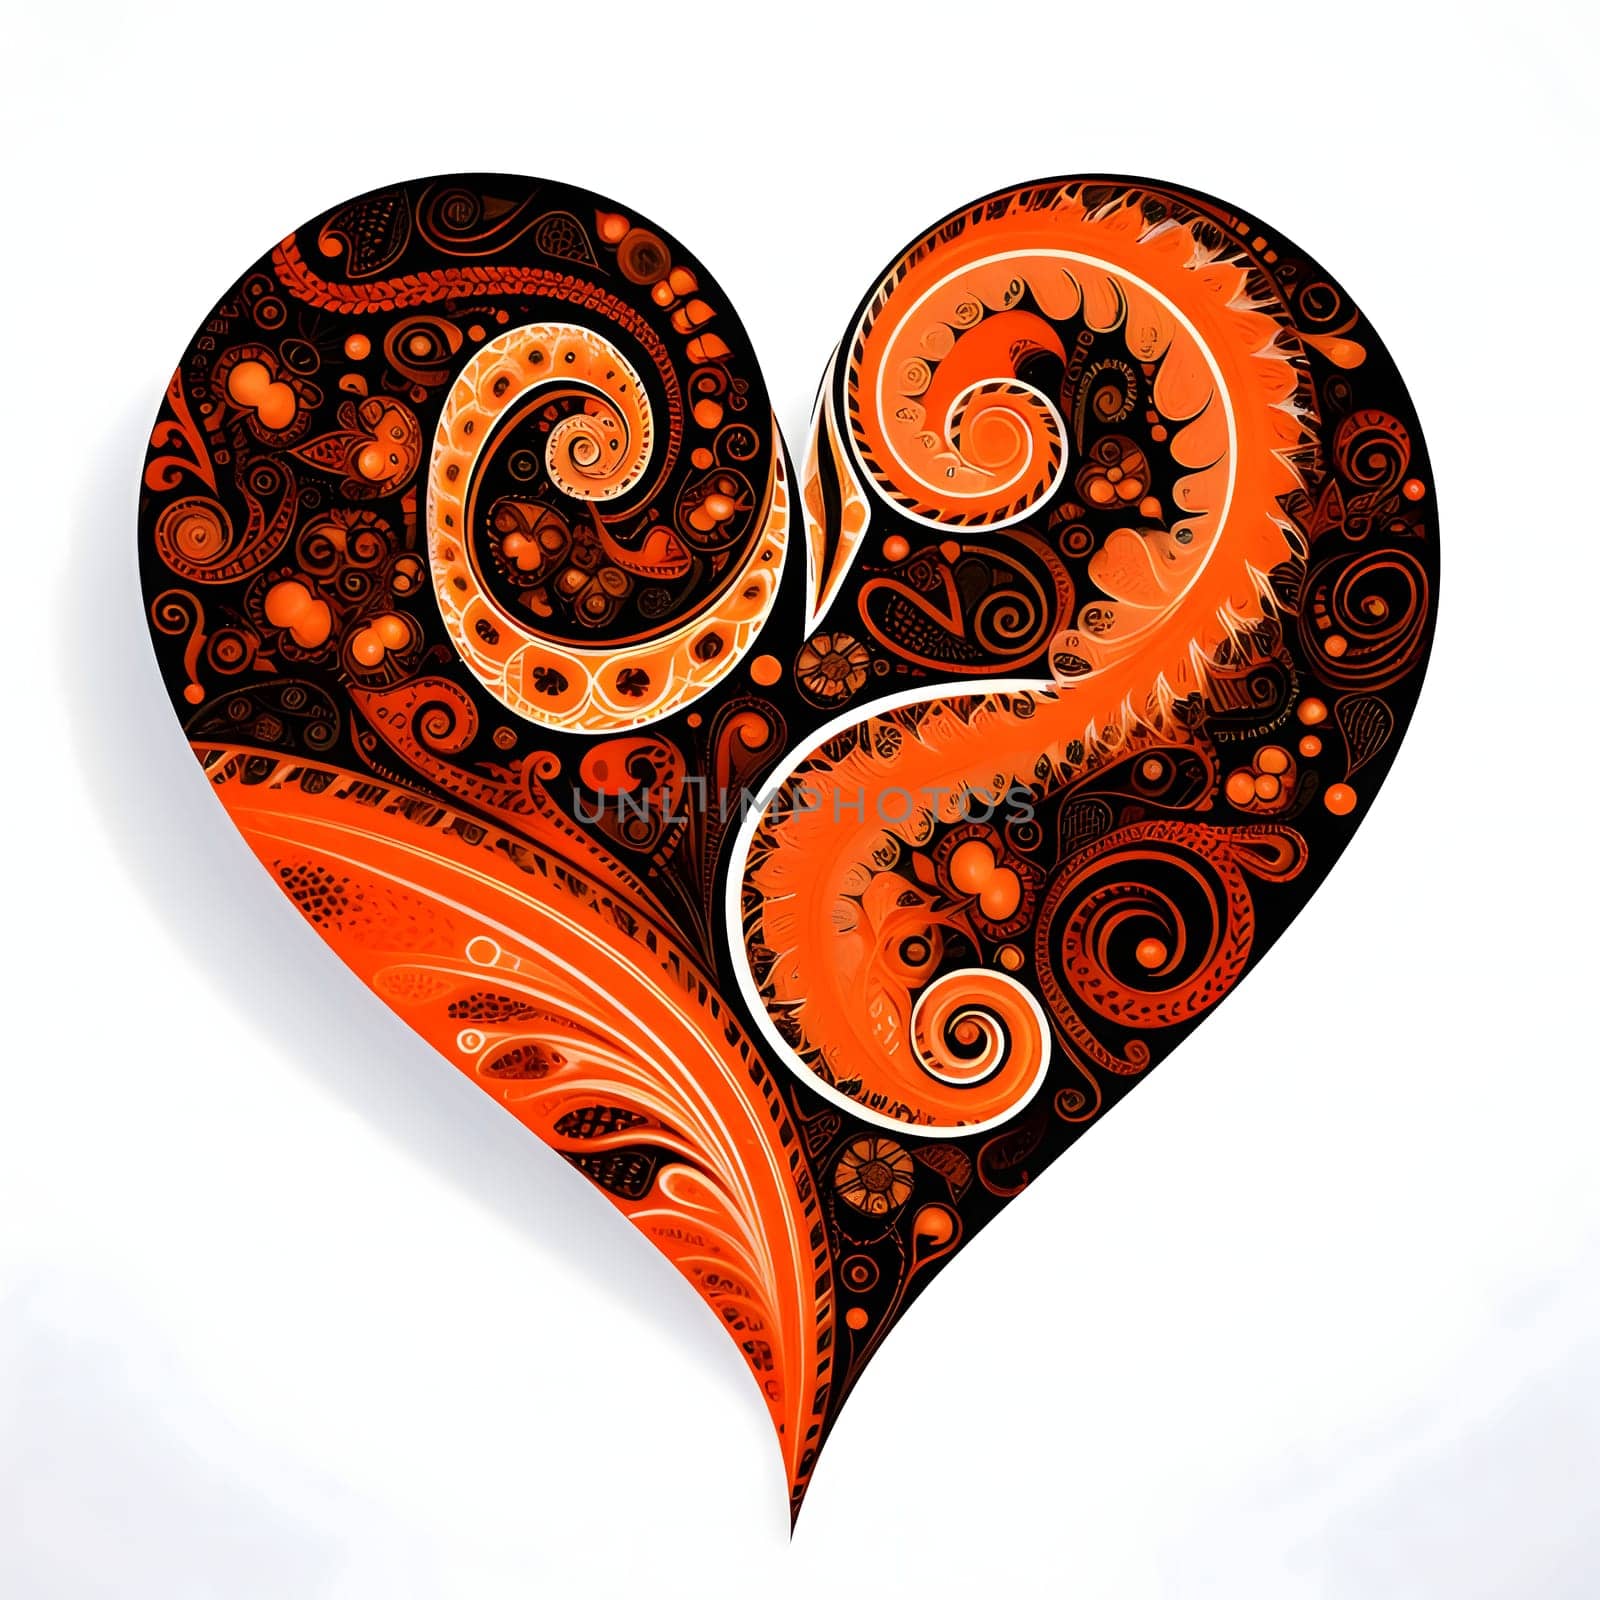 Abstract orange heart with decorative patterns white background. Heart as a symbol of affection and love. The time of falling in love and love.